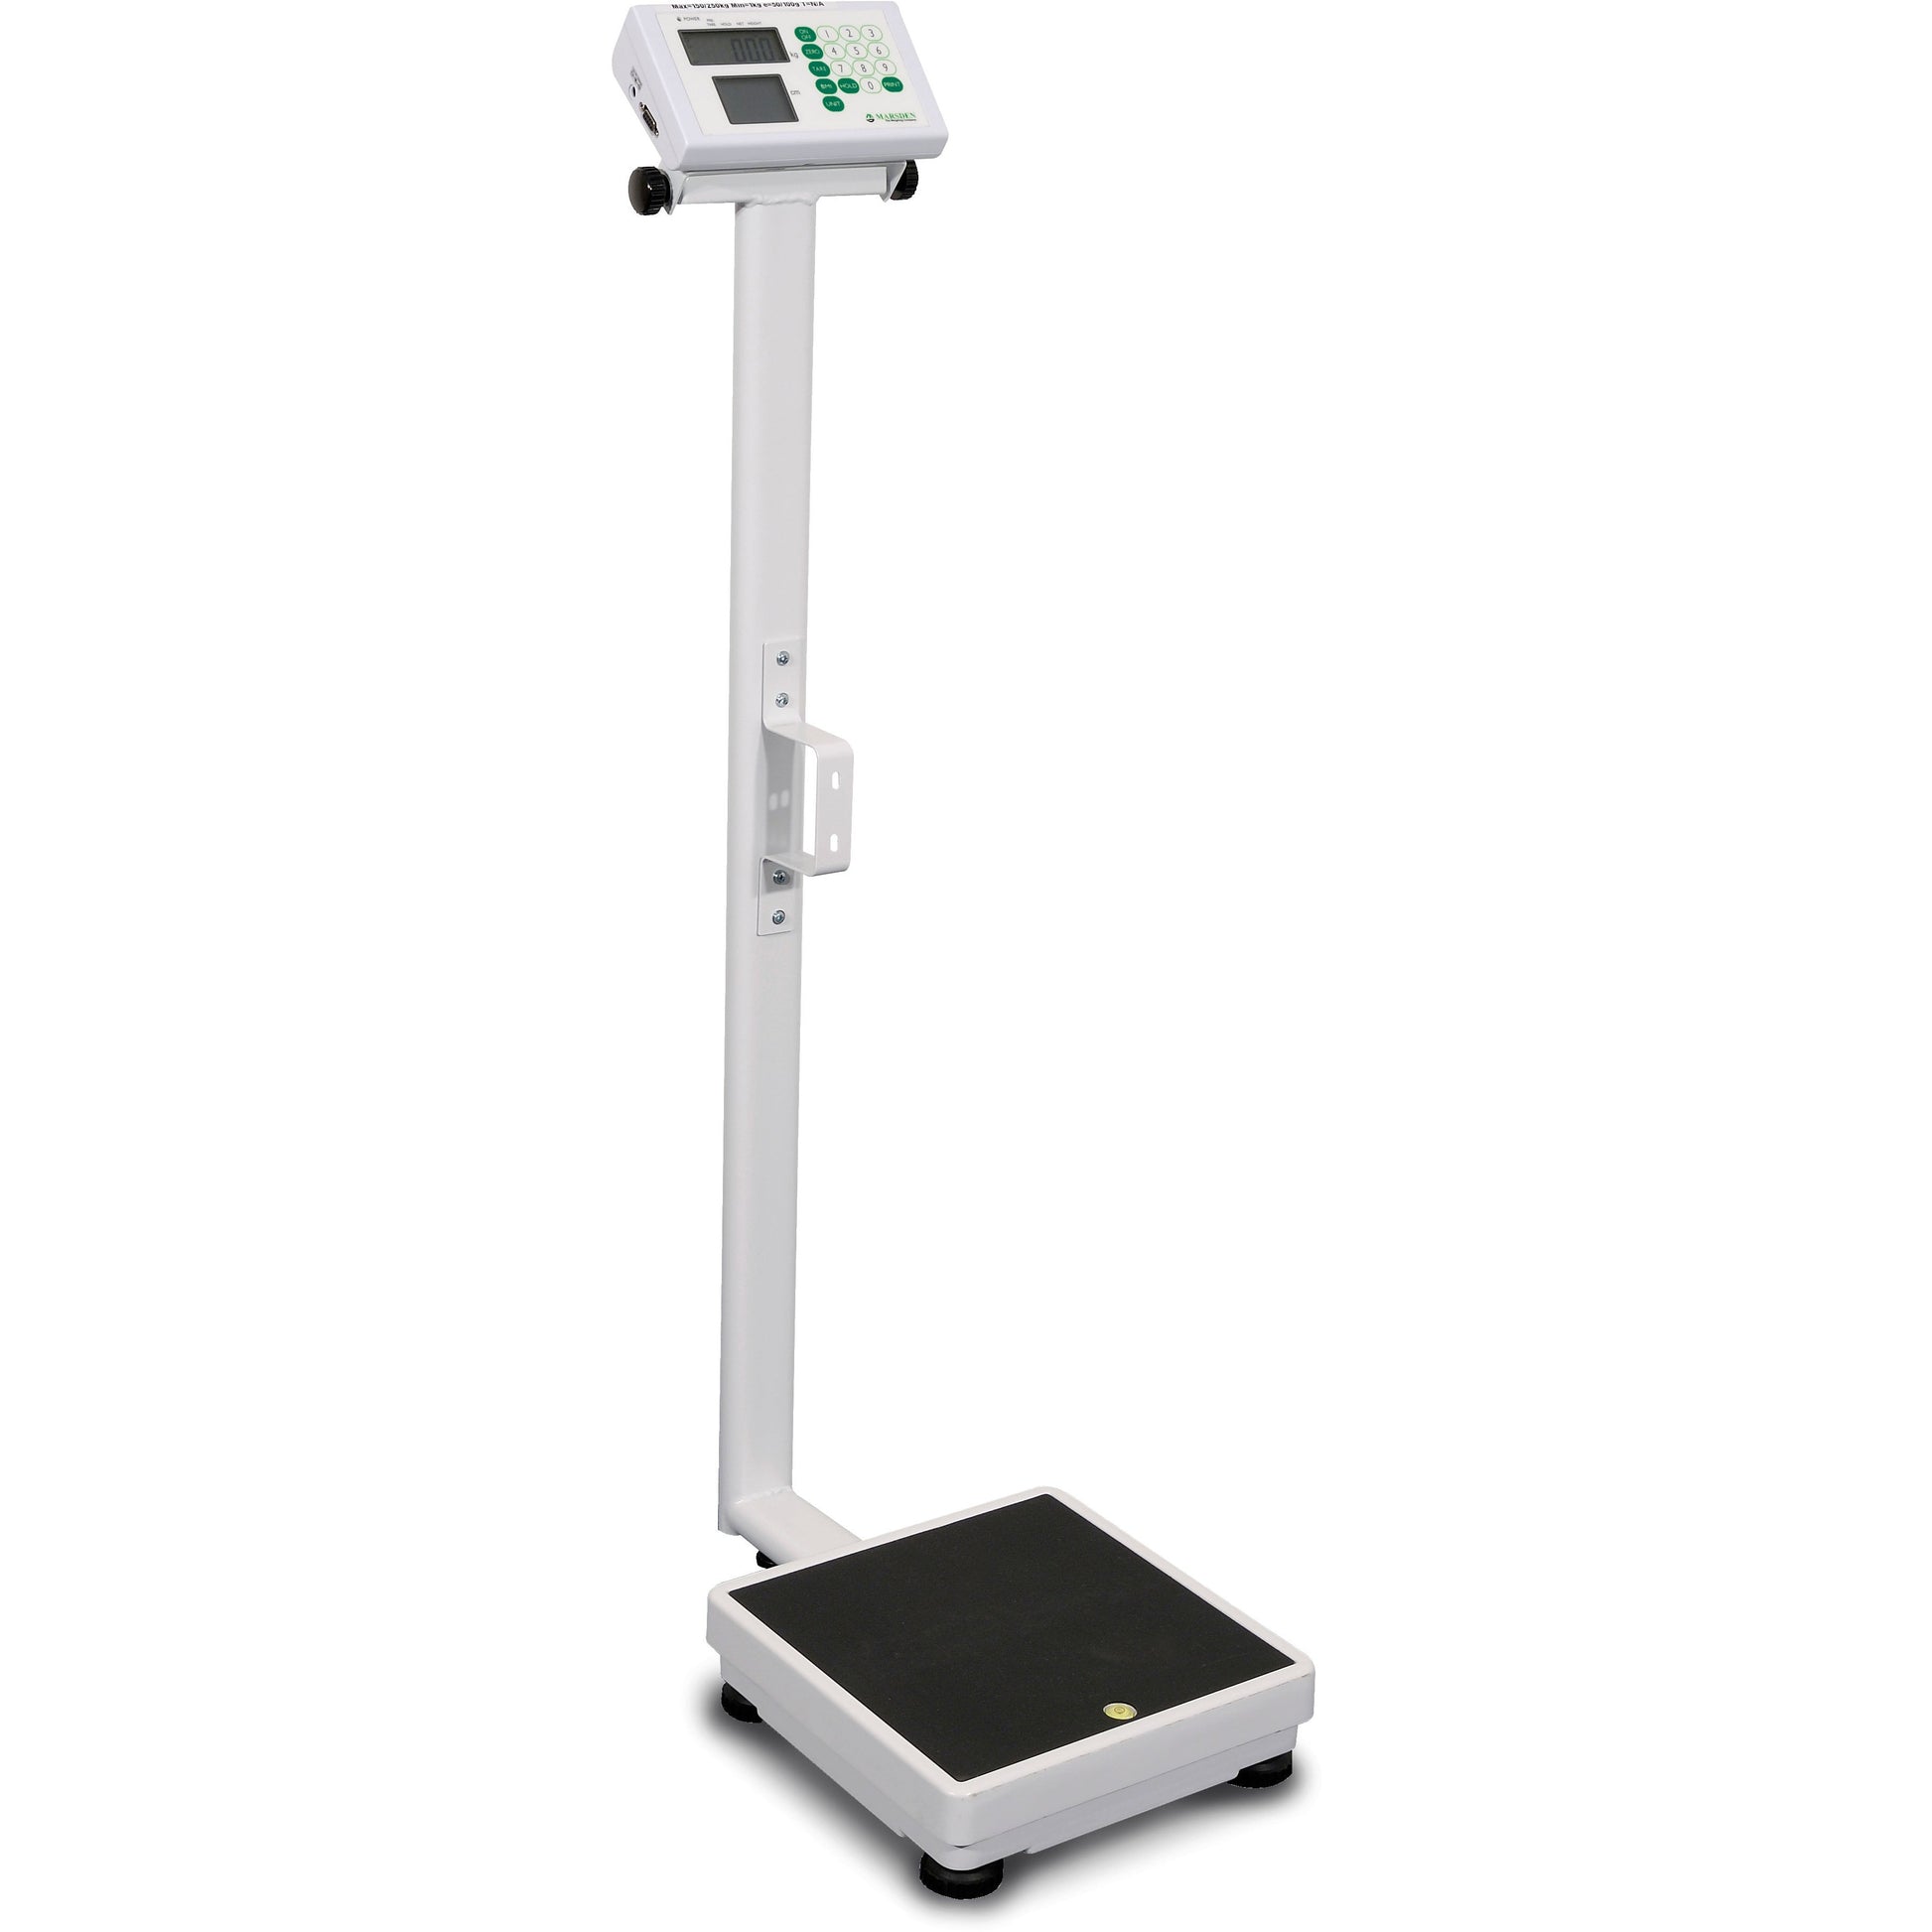 Electronic patient weighing scale - M-110 - Marsden Weighing